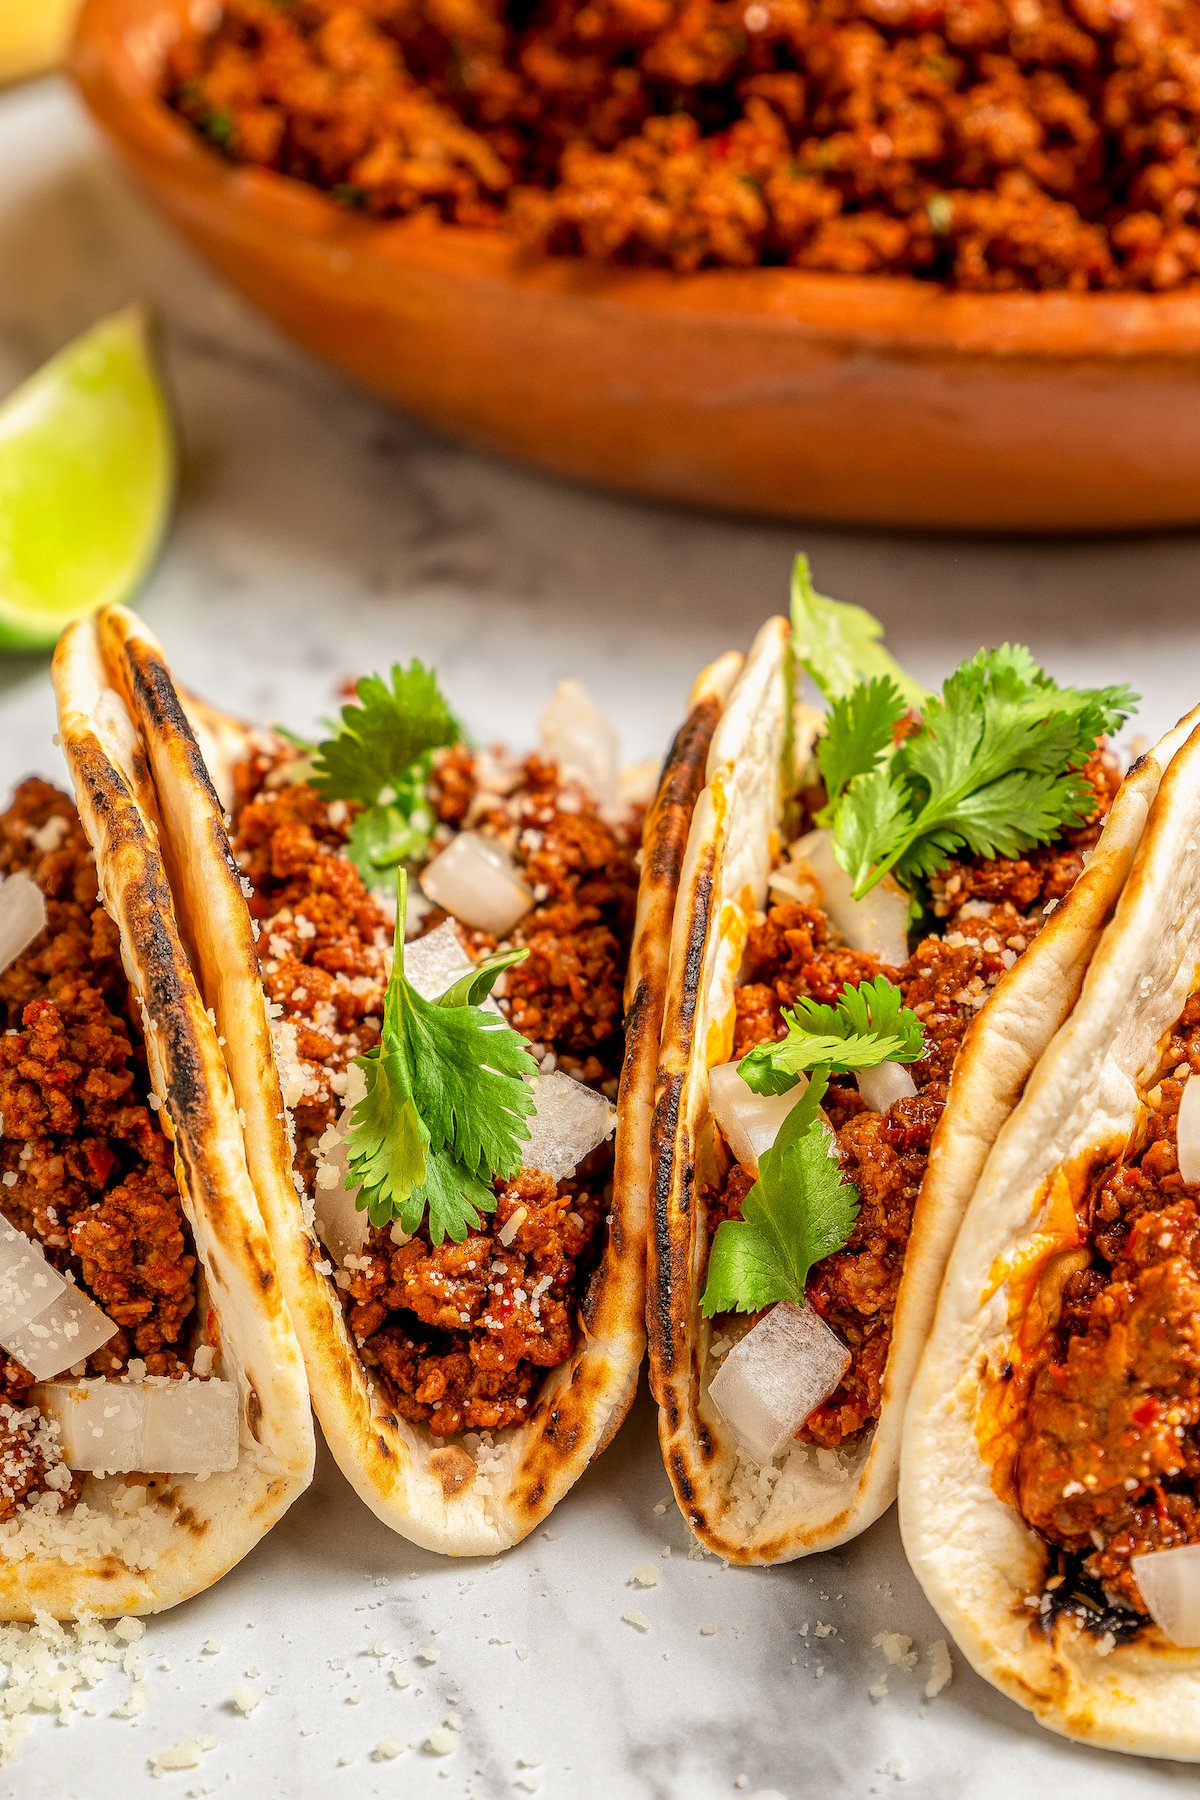 Flour tortillas stuffed with spicy taco meat and topped with cilantro, onion and cheese.